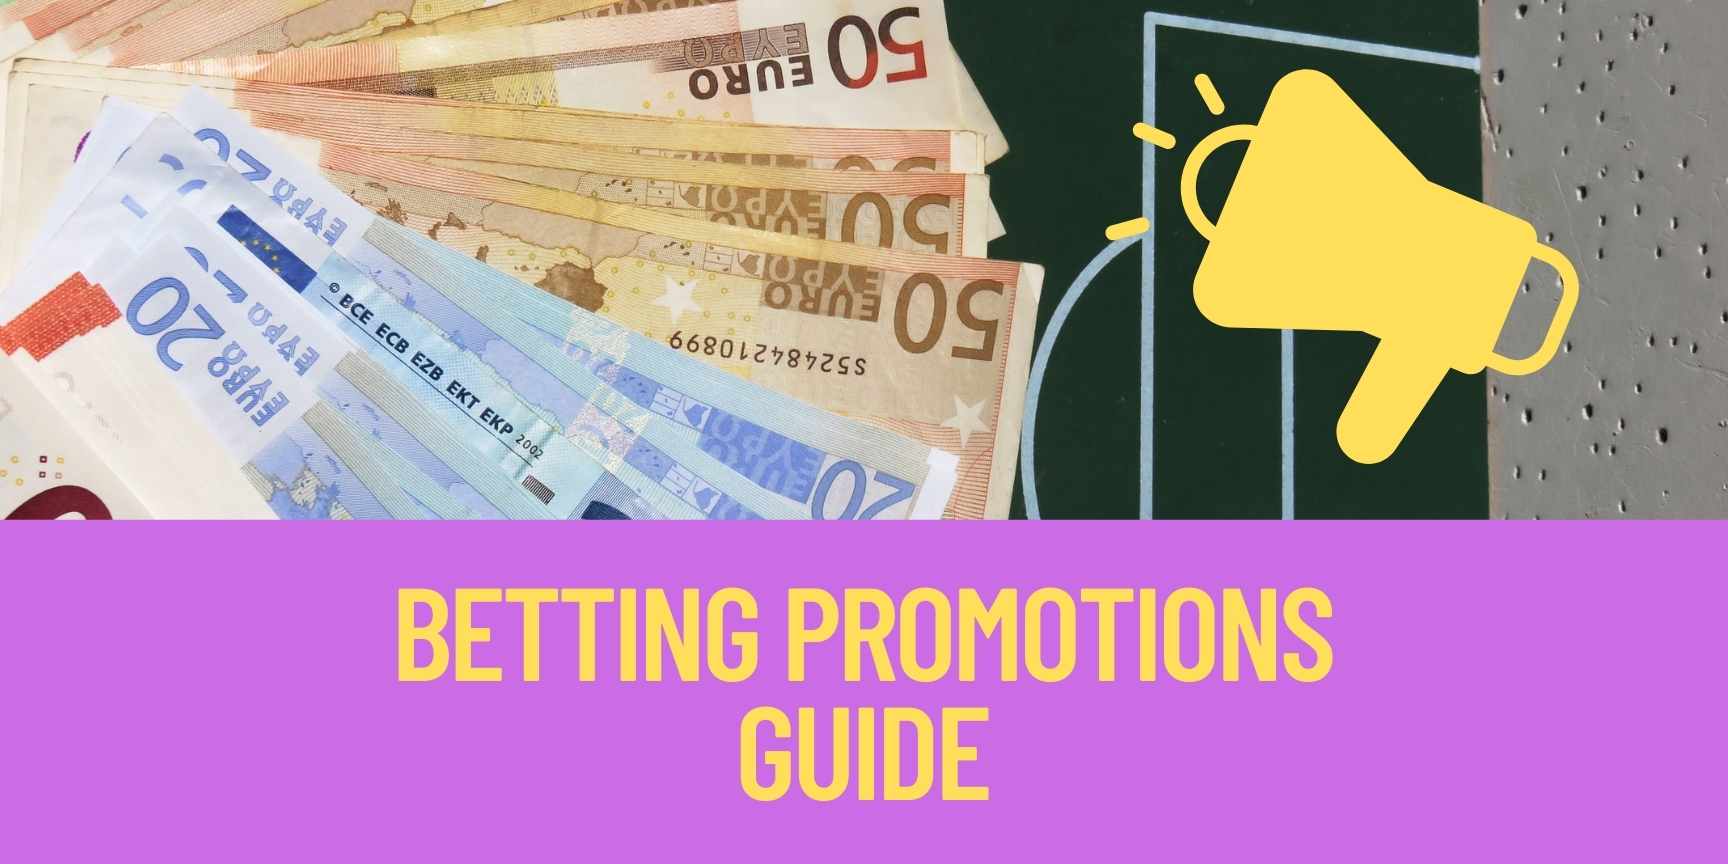 promotion guide